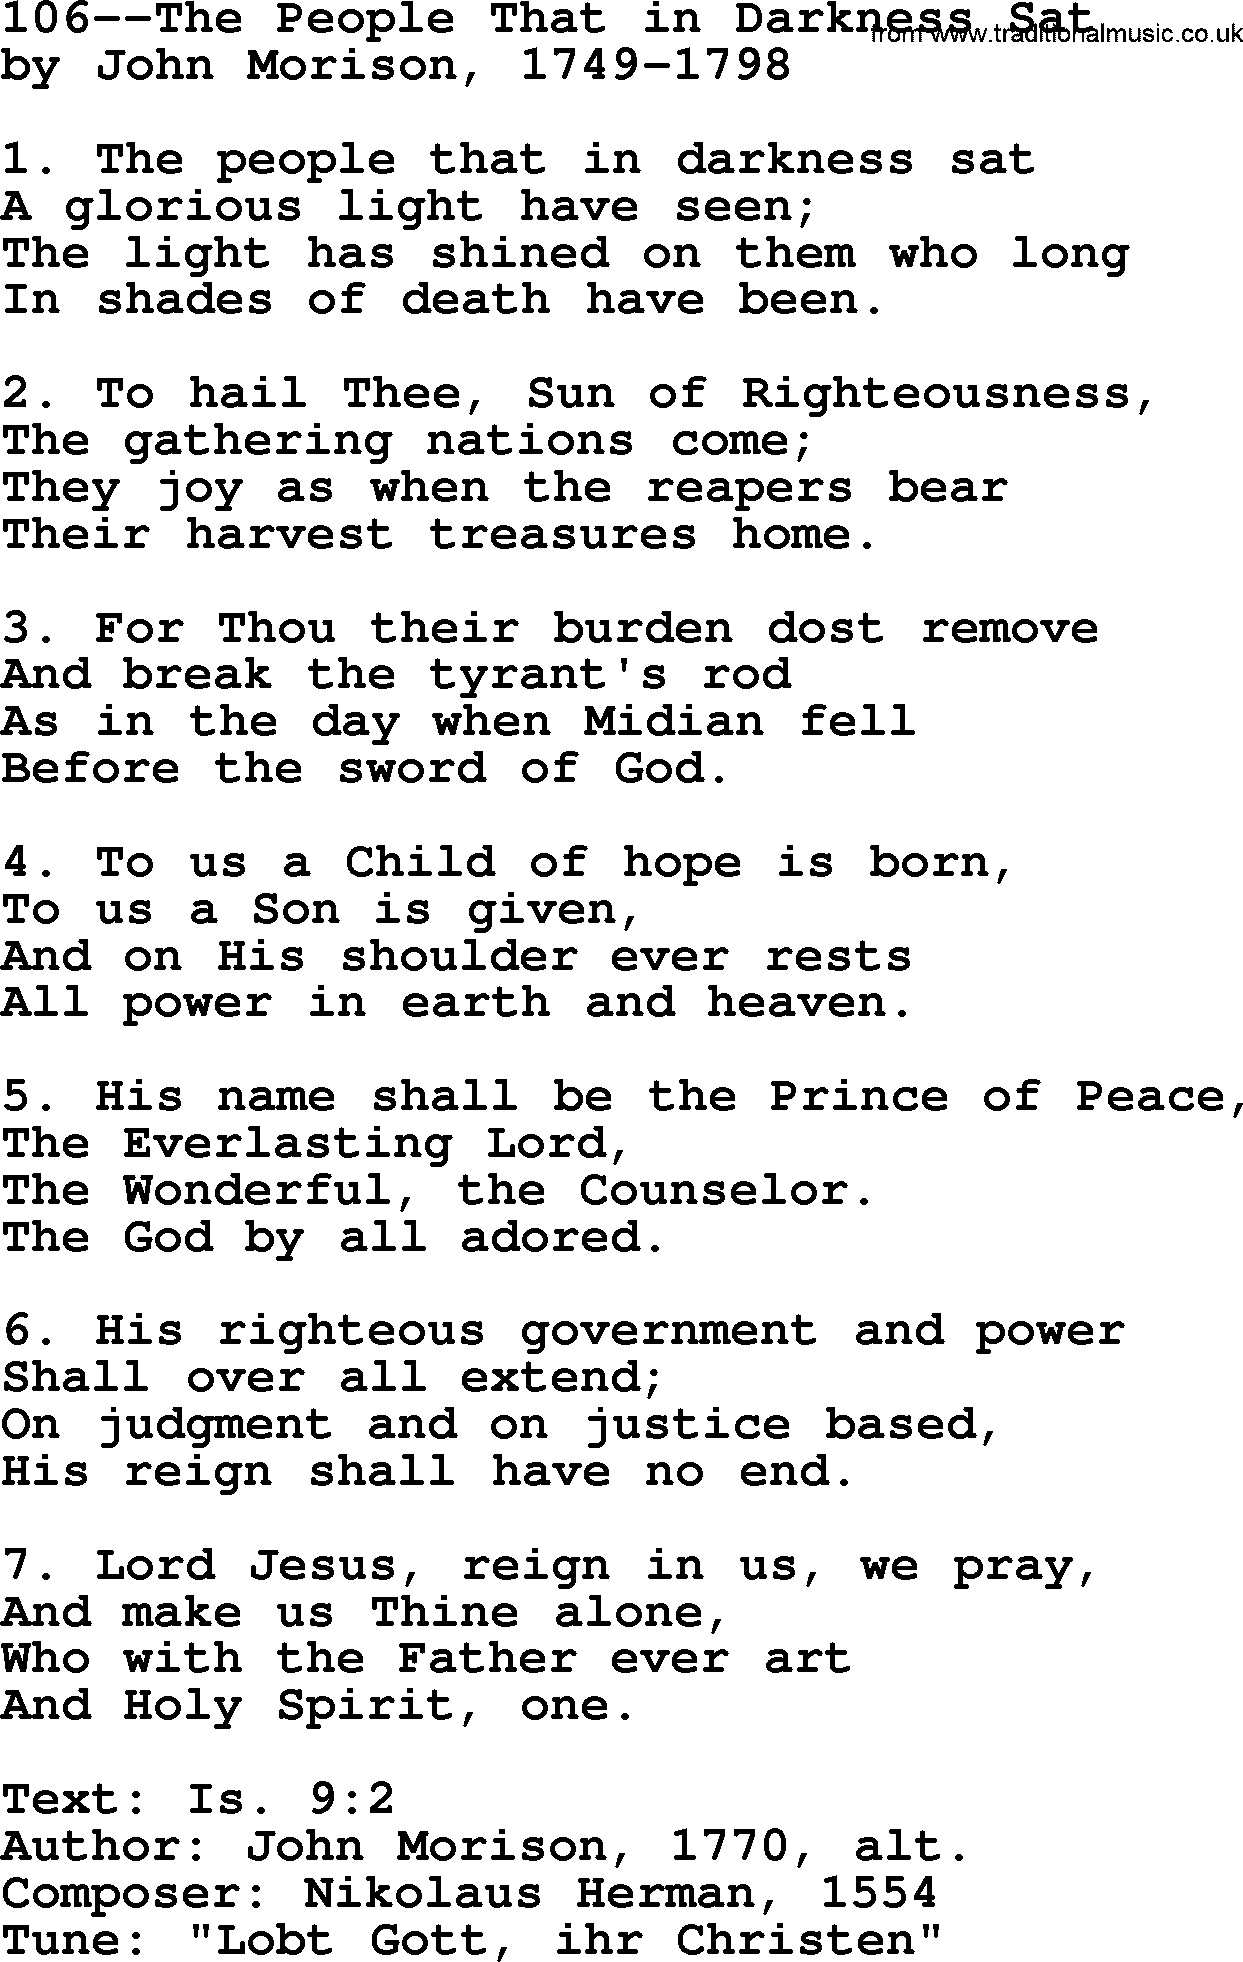 Lutheran Hymn: 106--The People That in Darkness Sat.txt lyrics with PDF